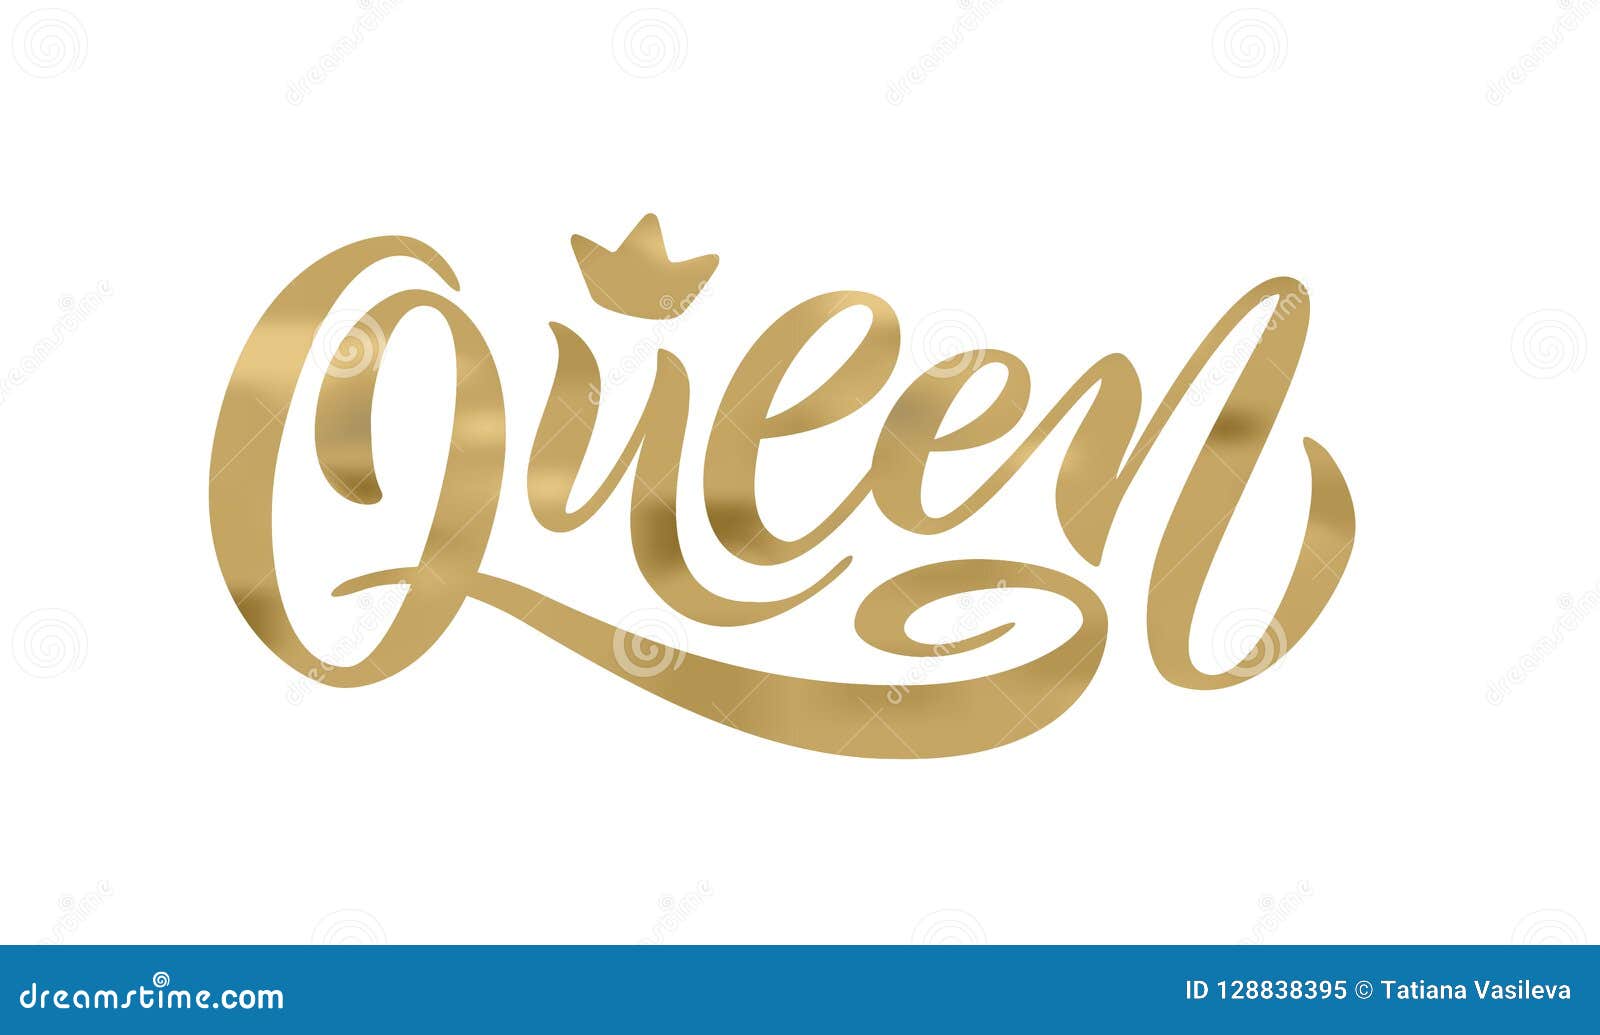 queen word with crown. hand lettering text  